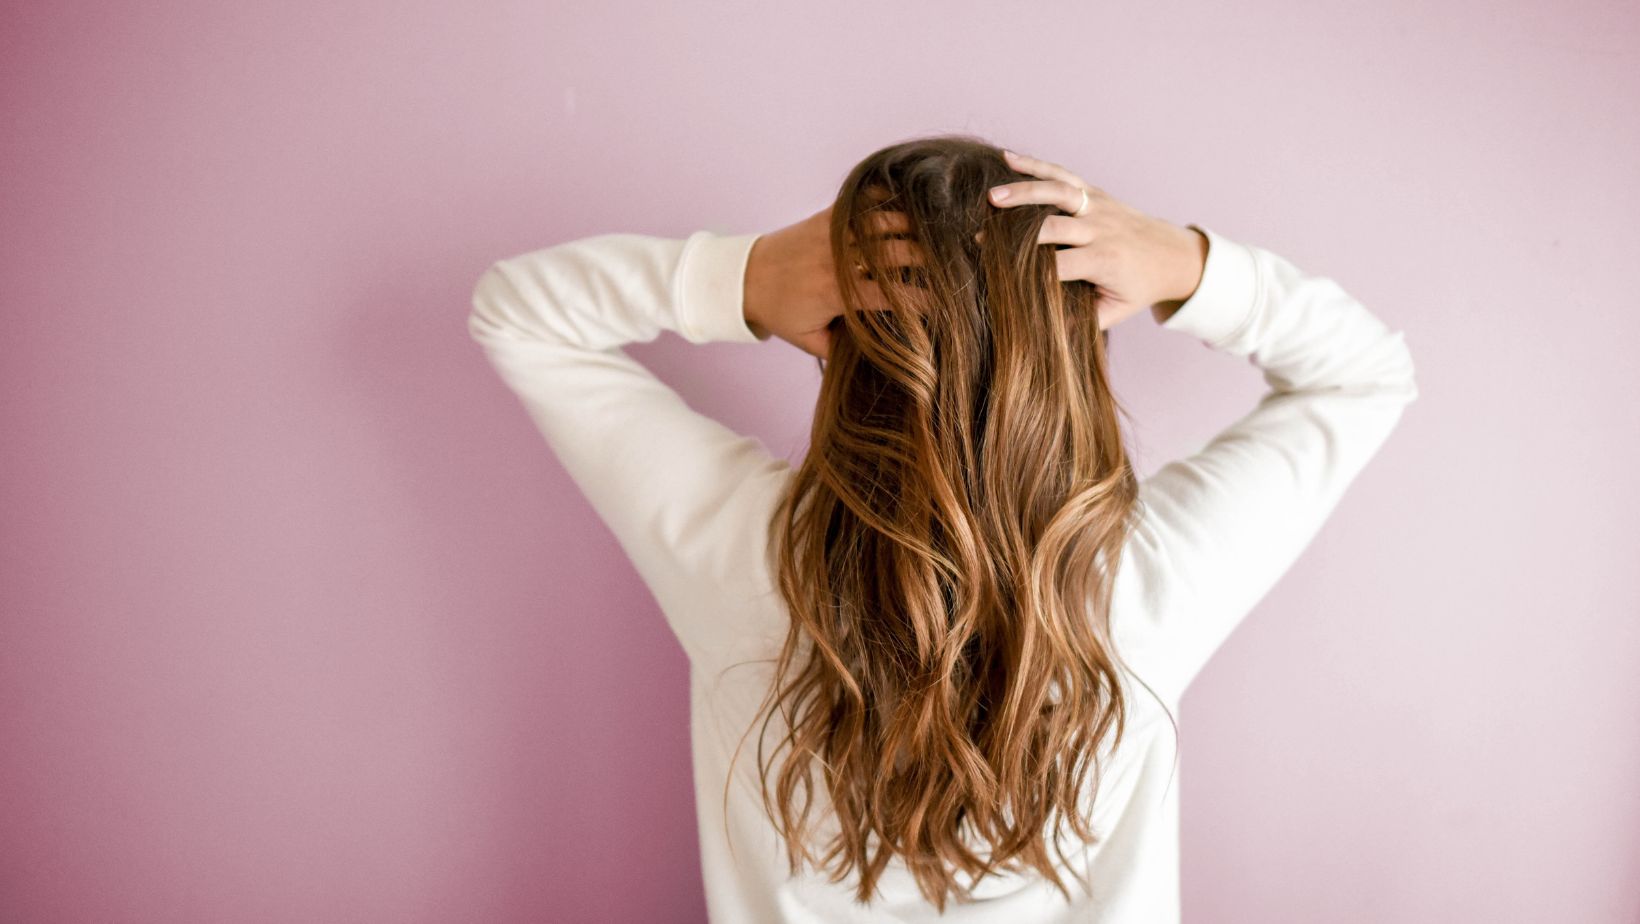 Friends Don’t Let Friends Live With Bad Color—Corrective Hair Color to the Rescue!